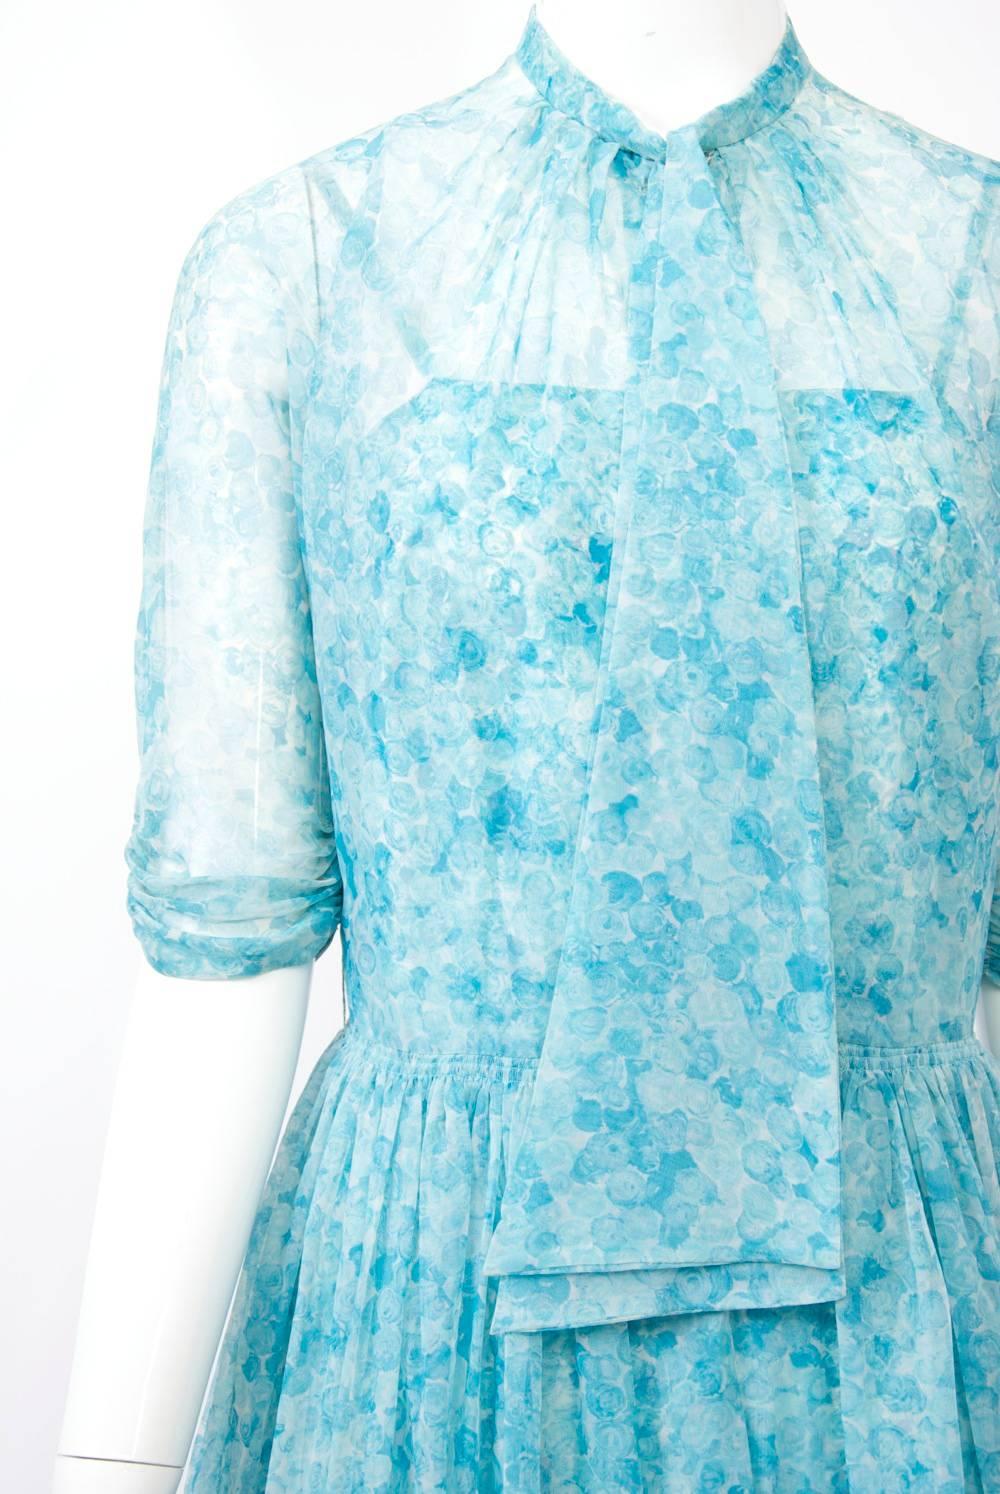 Early Leslie Fay ensemble in matching aqua prints, the shirt-style overdress or coat in sheer fabric featuring three-quarter shirred sleeves, buttons to the waist, a full skirt, and a self tie at the neck. Underneath is a sundress, possibly acetate,